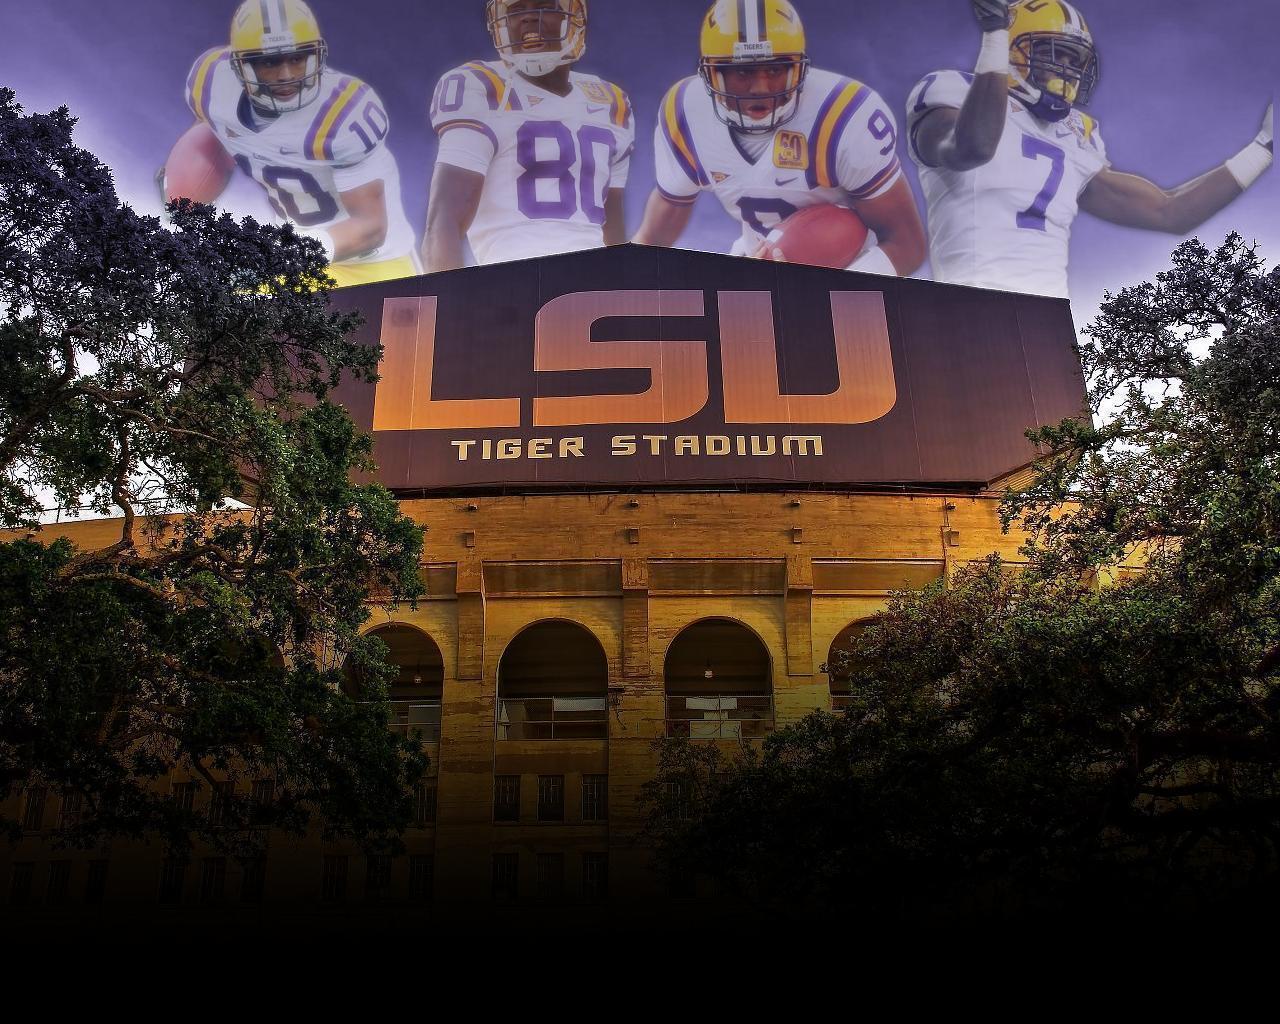 LSU Football Picture Wallpaper 27428 High Resolution. download